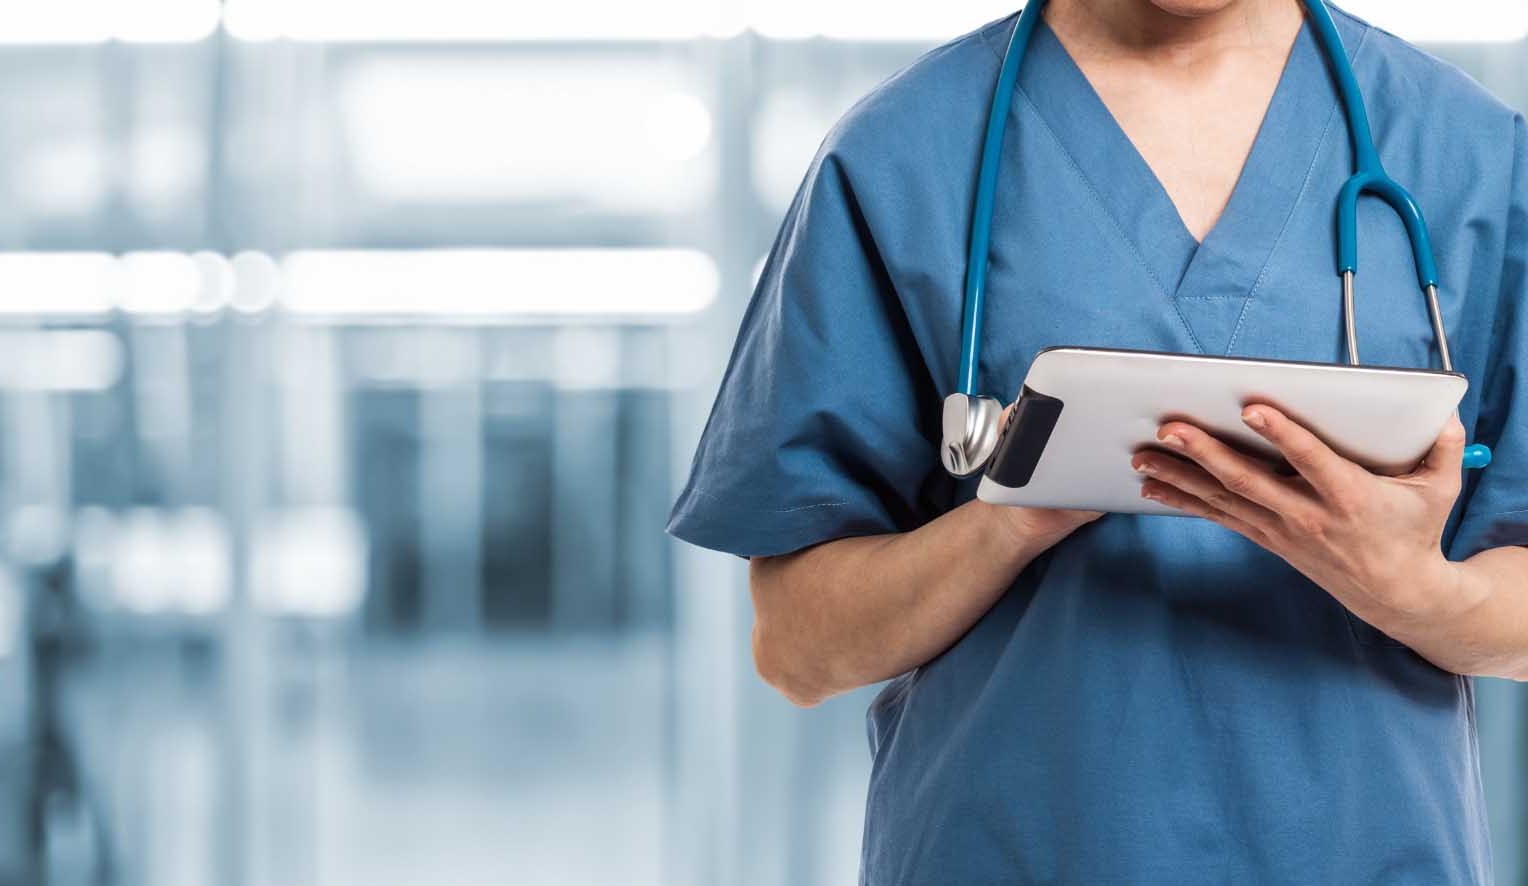 Medical professional in scrubs holding a tablet. Stethoscope around their neck matches their blue scrubs. 